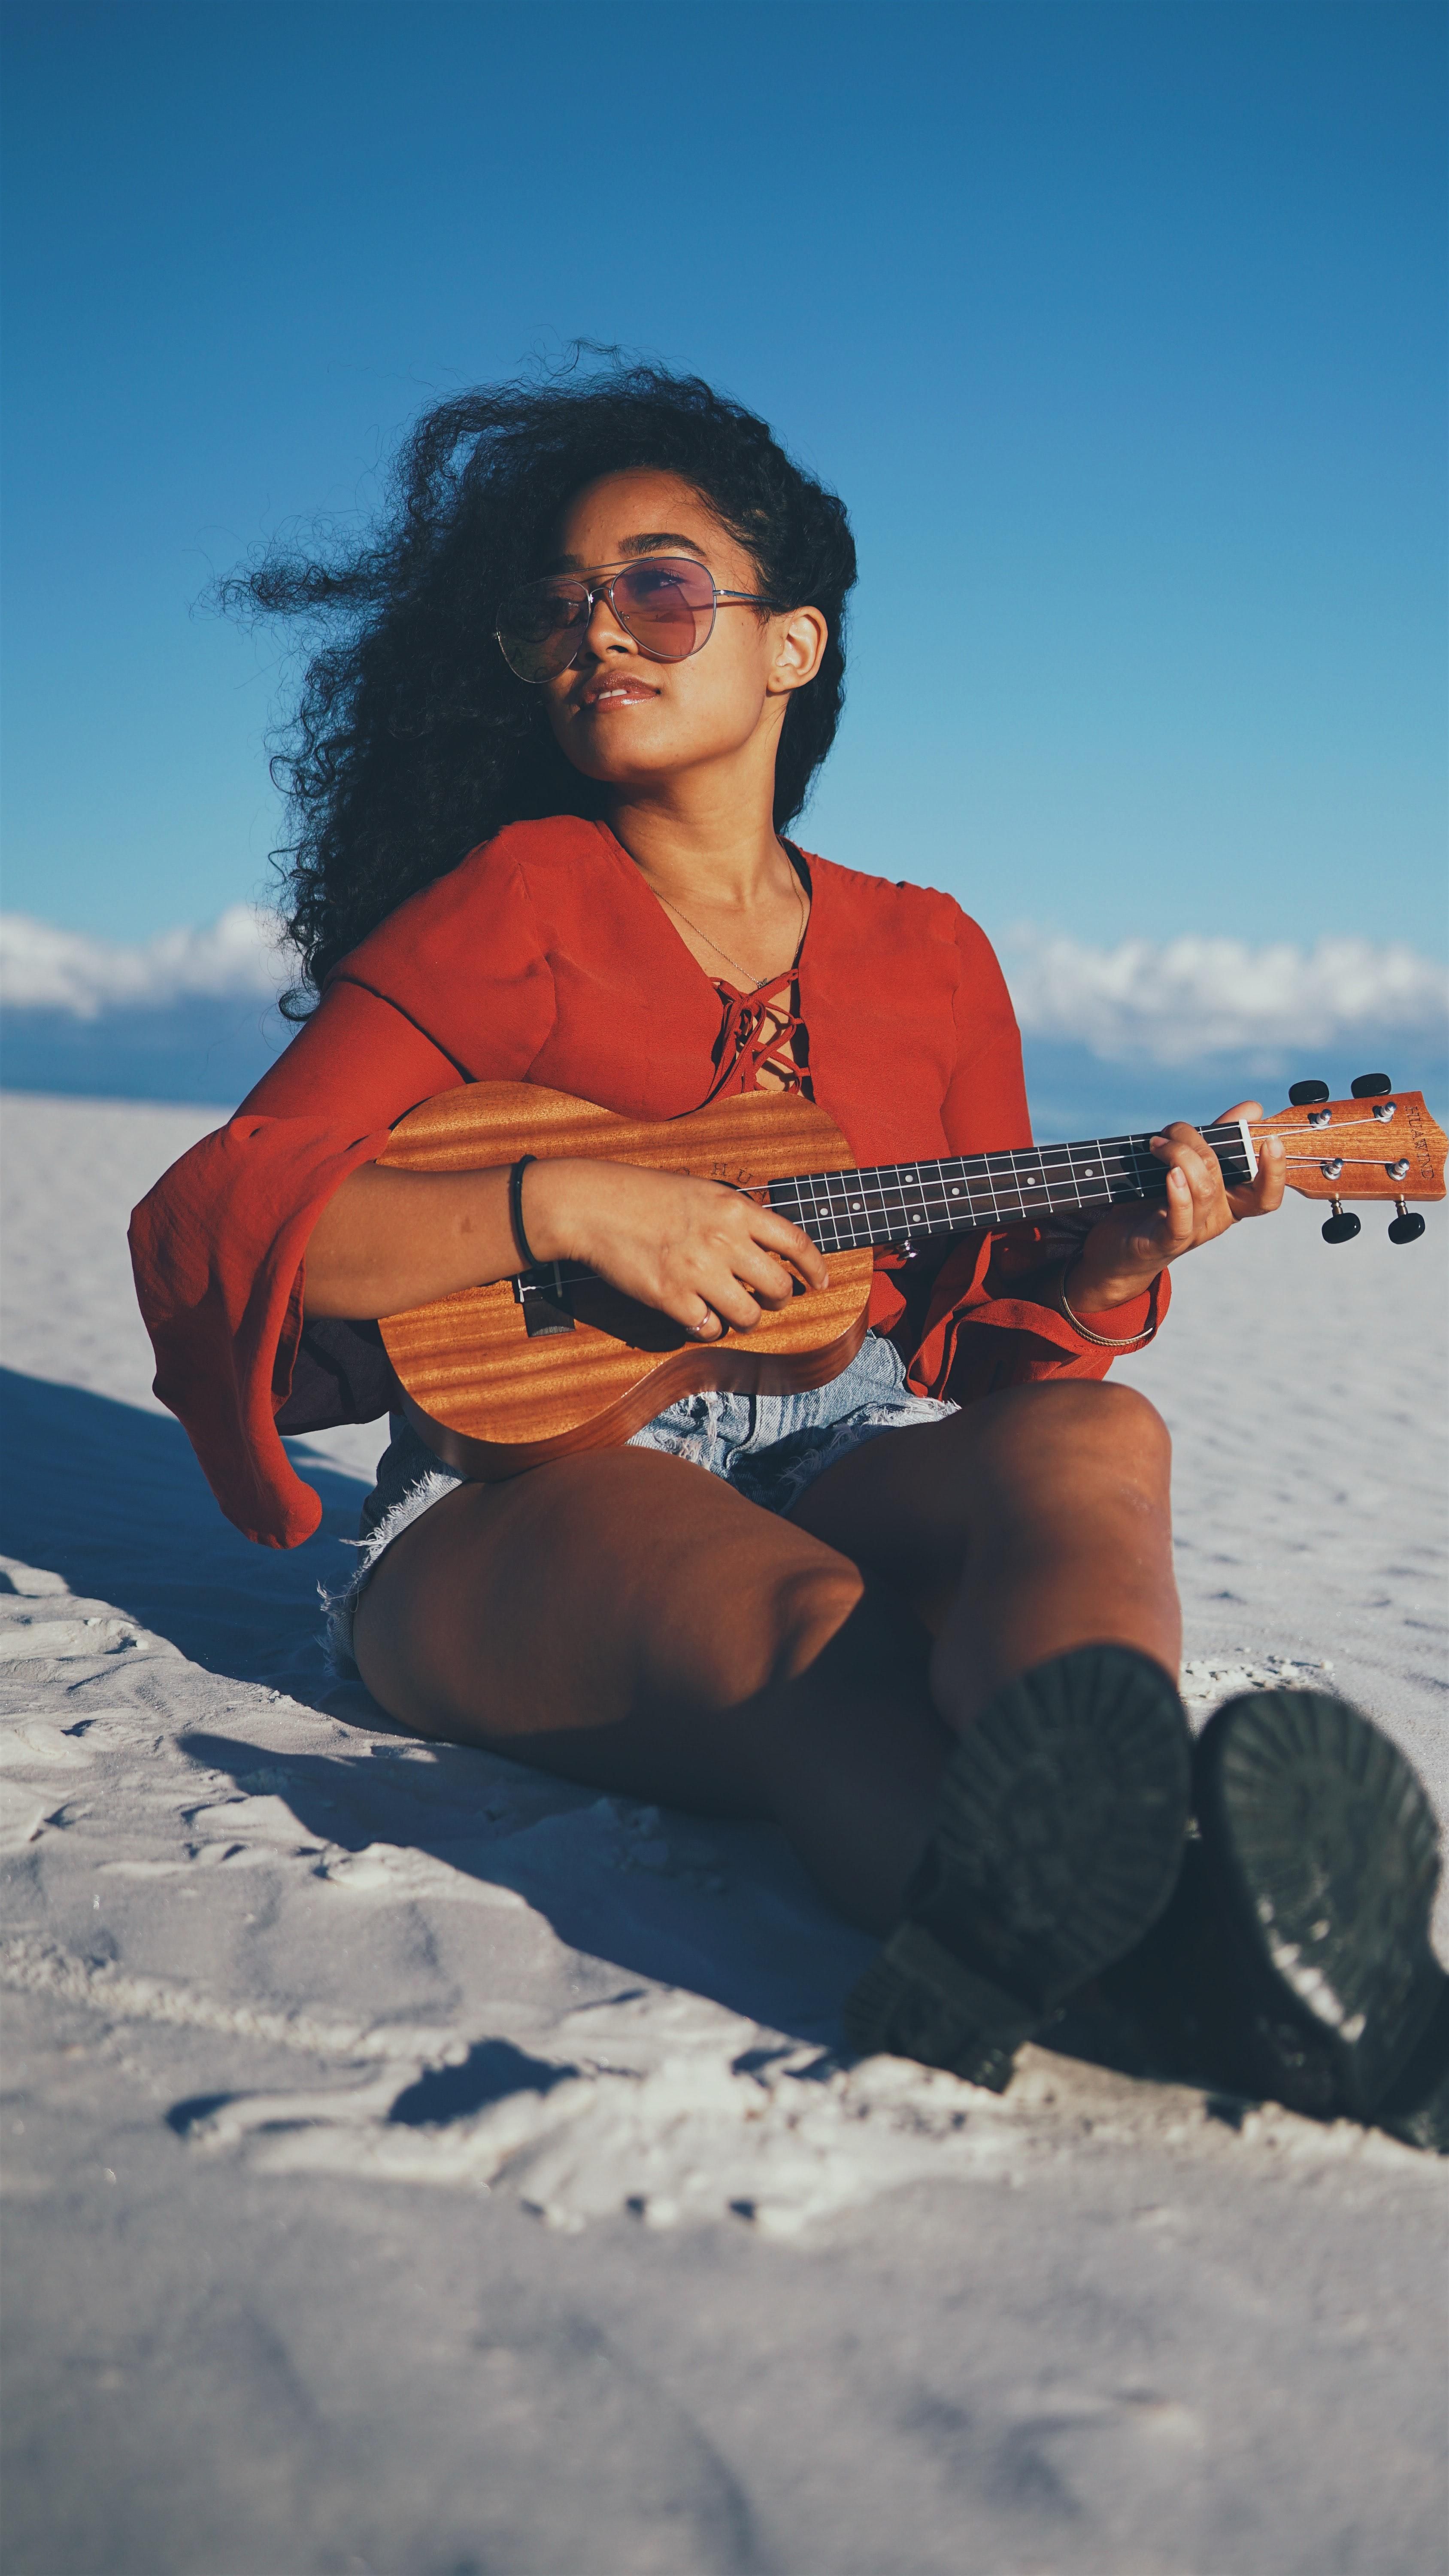 Top Tips for Learning the Ukulele